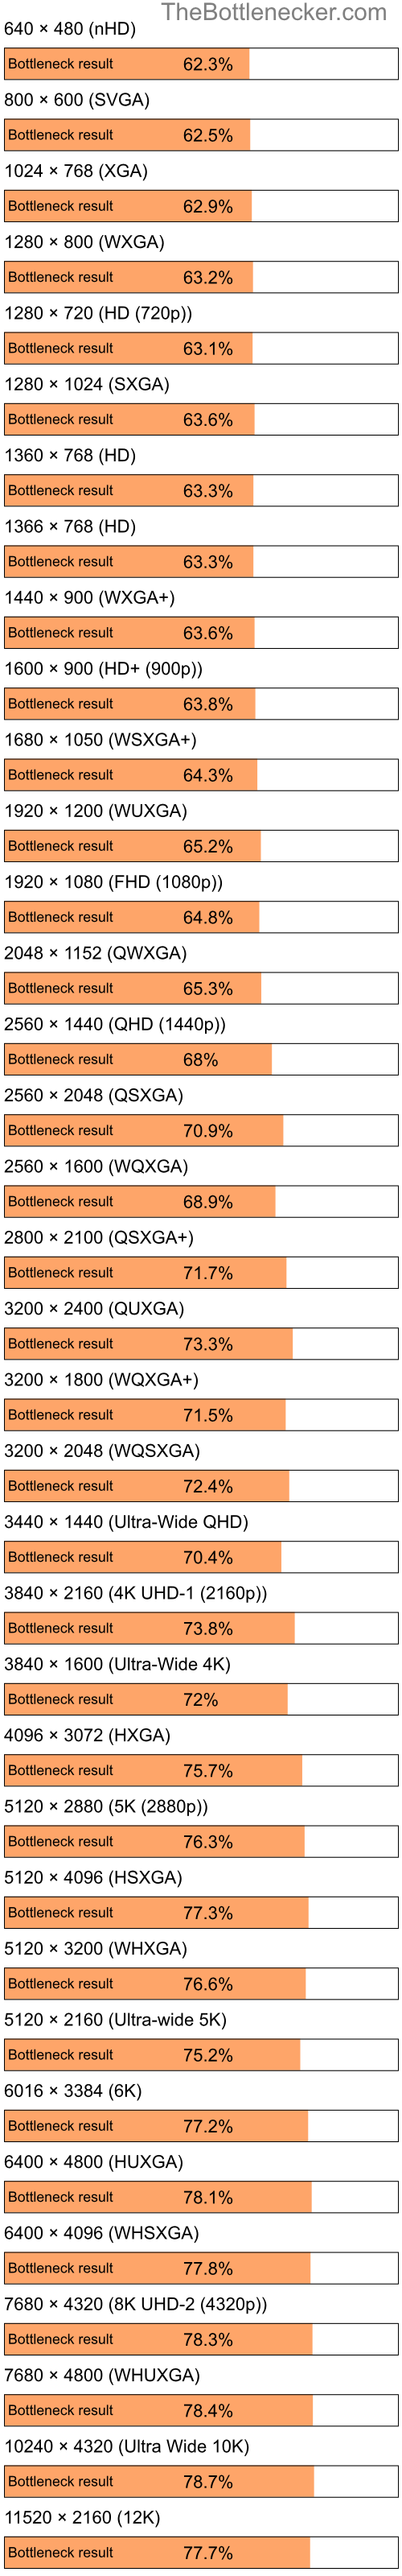 Bottleneck results by resolution for Intel Pentium 4 and NVIDIA GeForce 8400M GT in Processor Intense Tasks